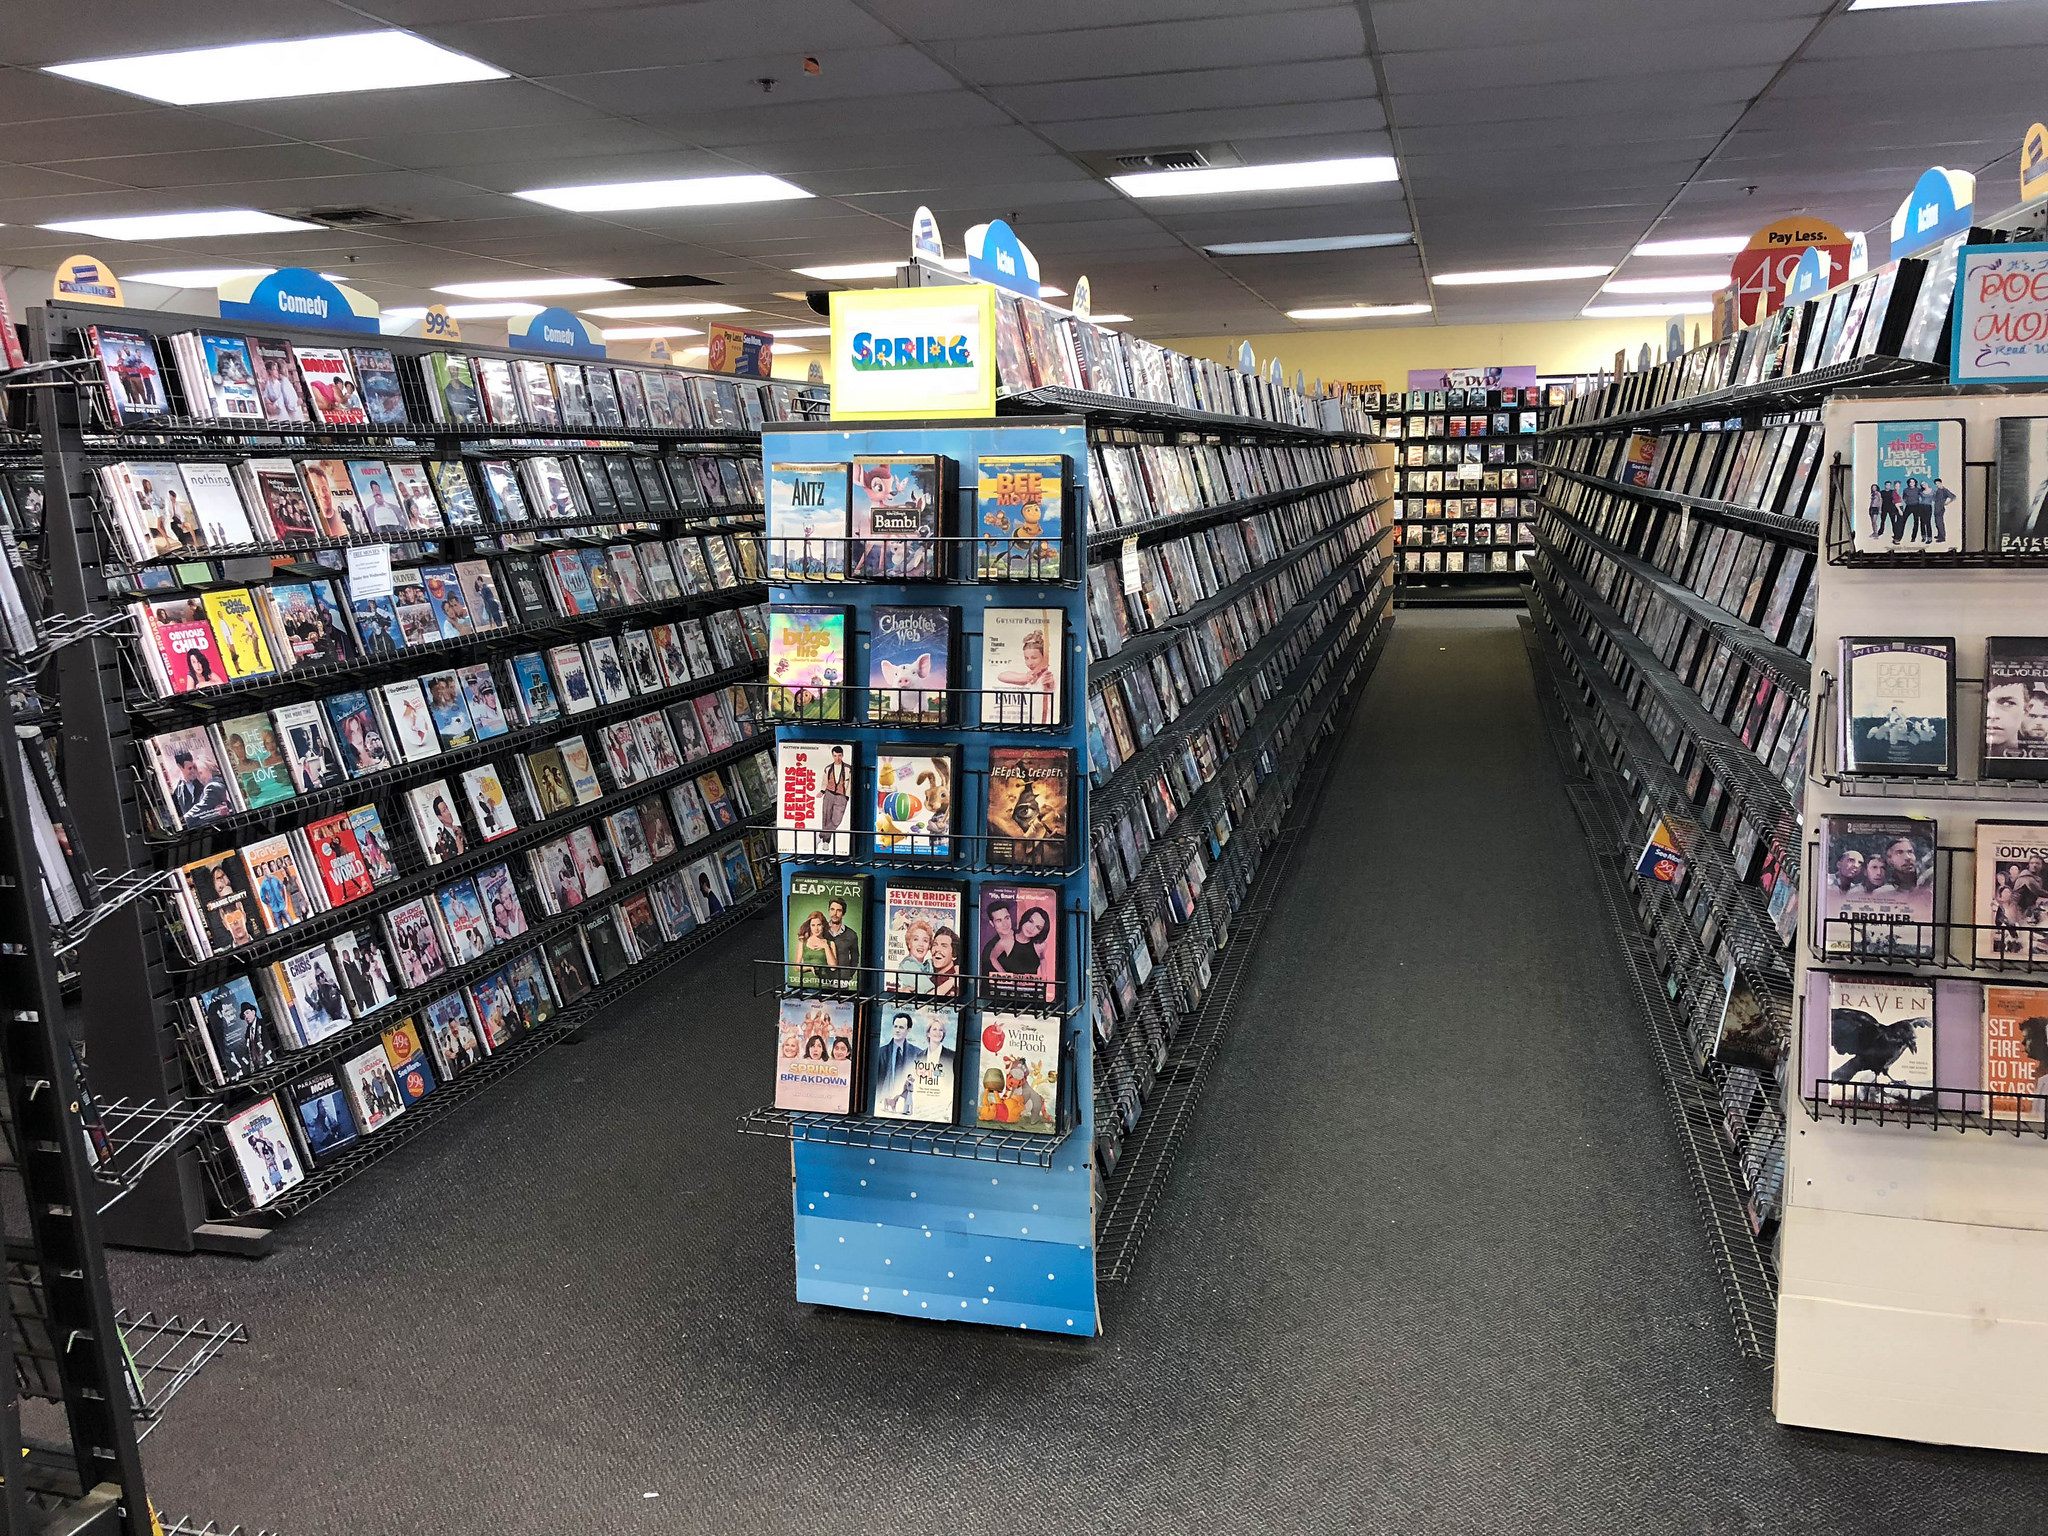 Old Rental Store Turned INTO A Video Game Store? 